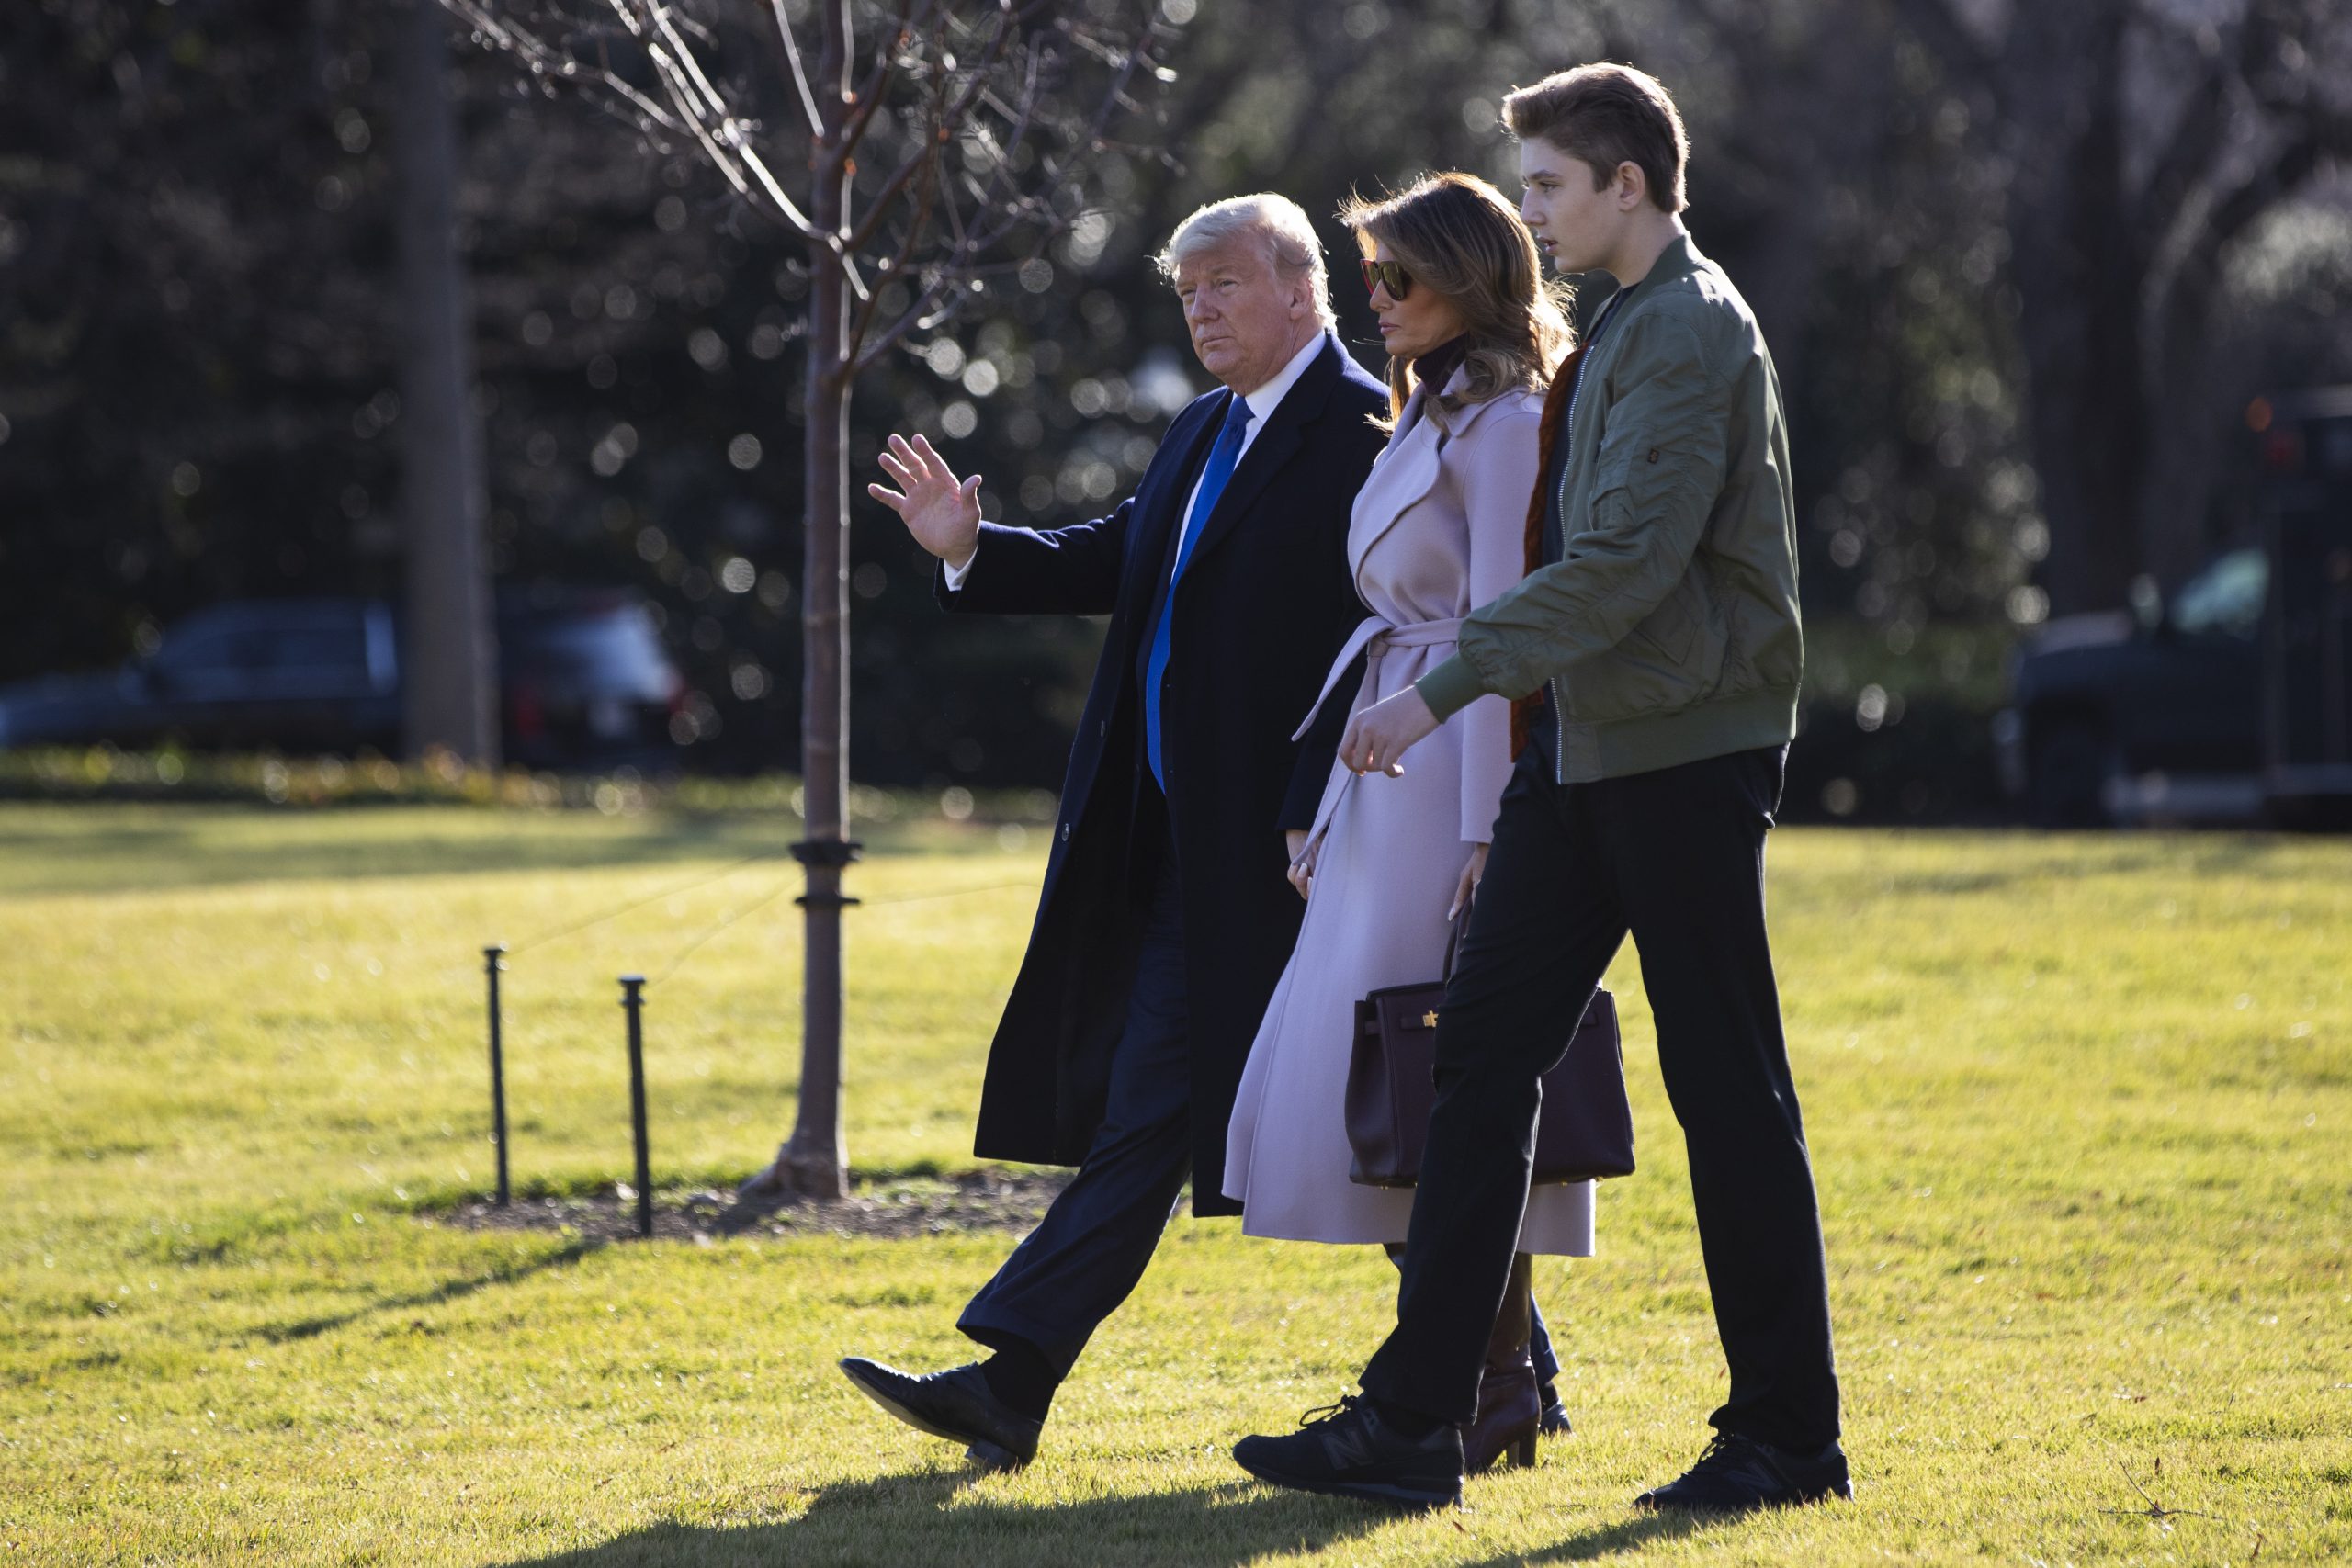 President Trump walks with first lady Melania Trump and Barron Trump to board Marine One on the South Lawn of the White House on Jan. 17, 2020, in Washington.